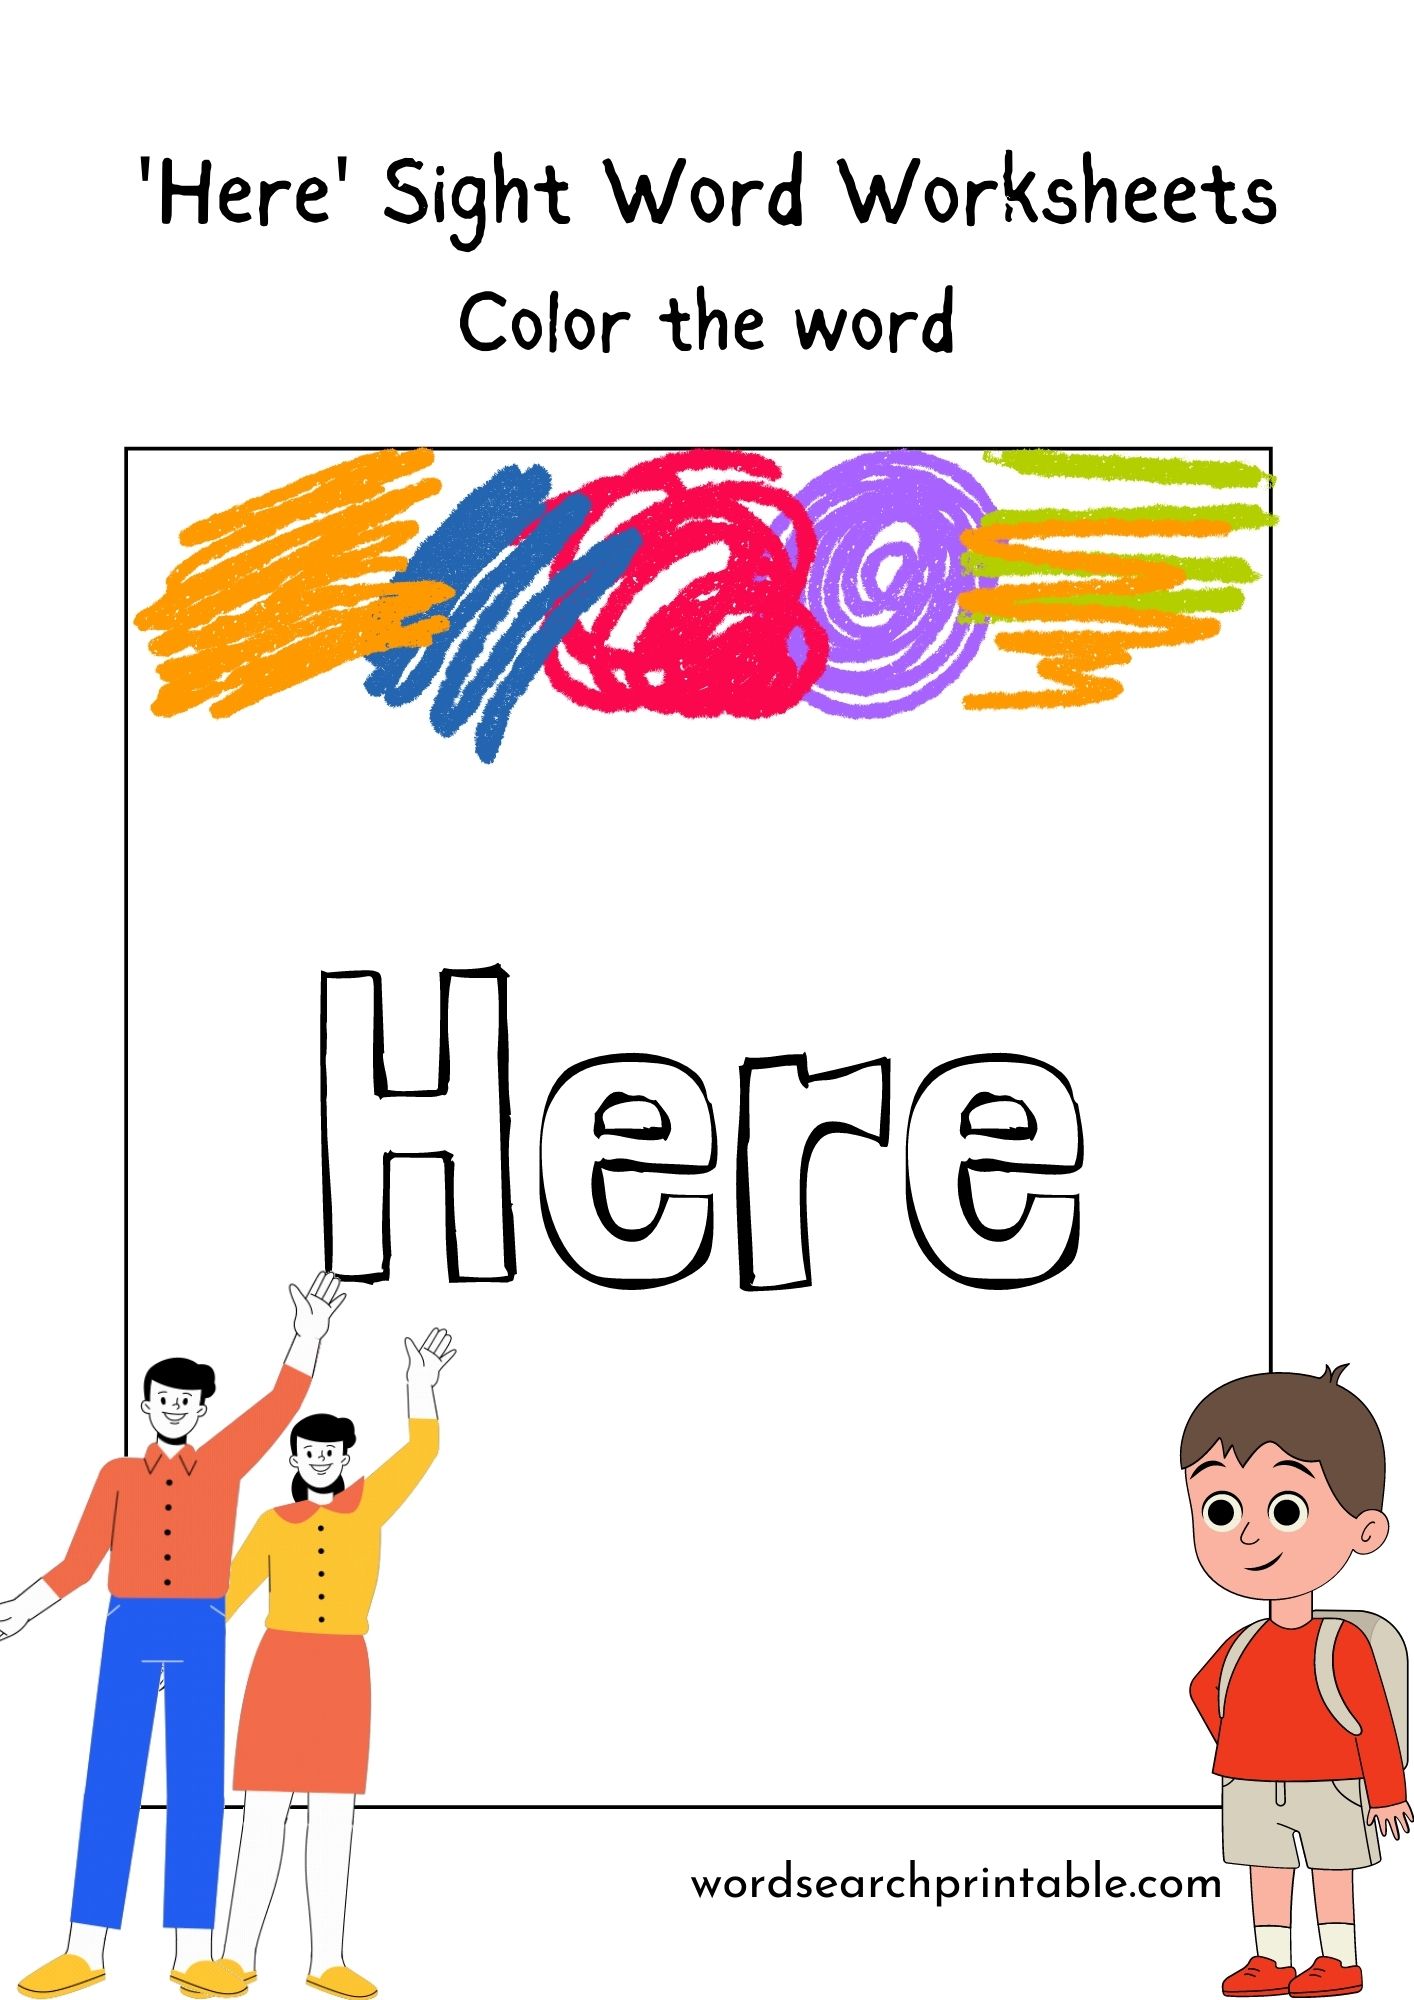 Color the sight word “Here”